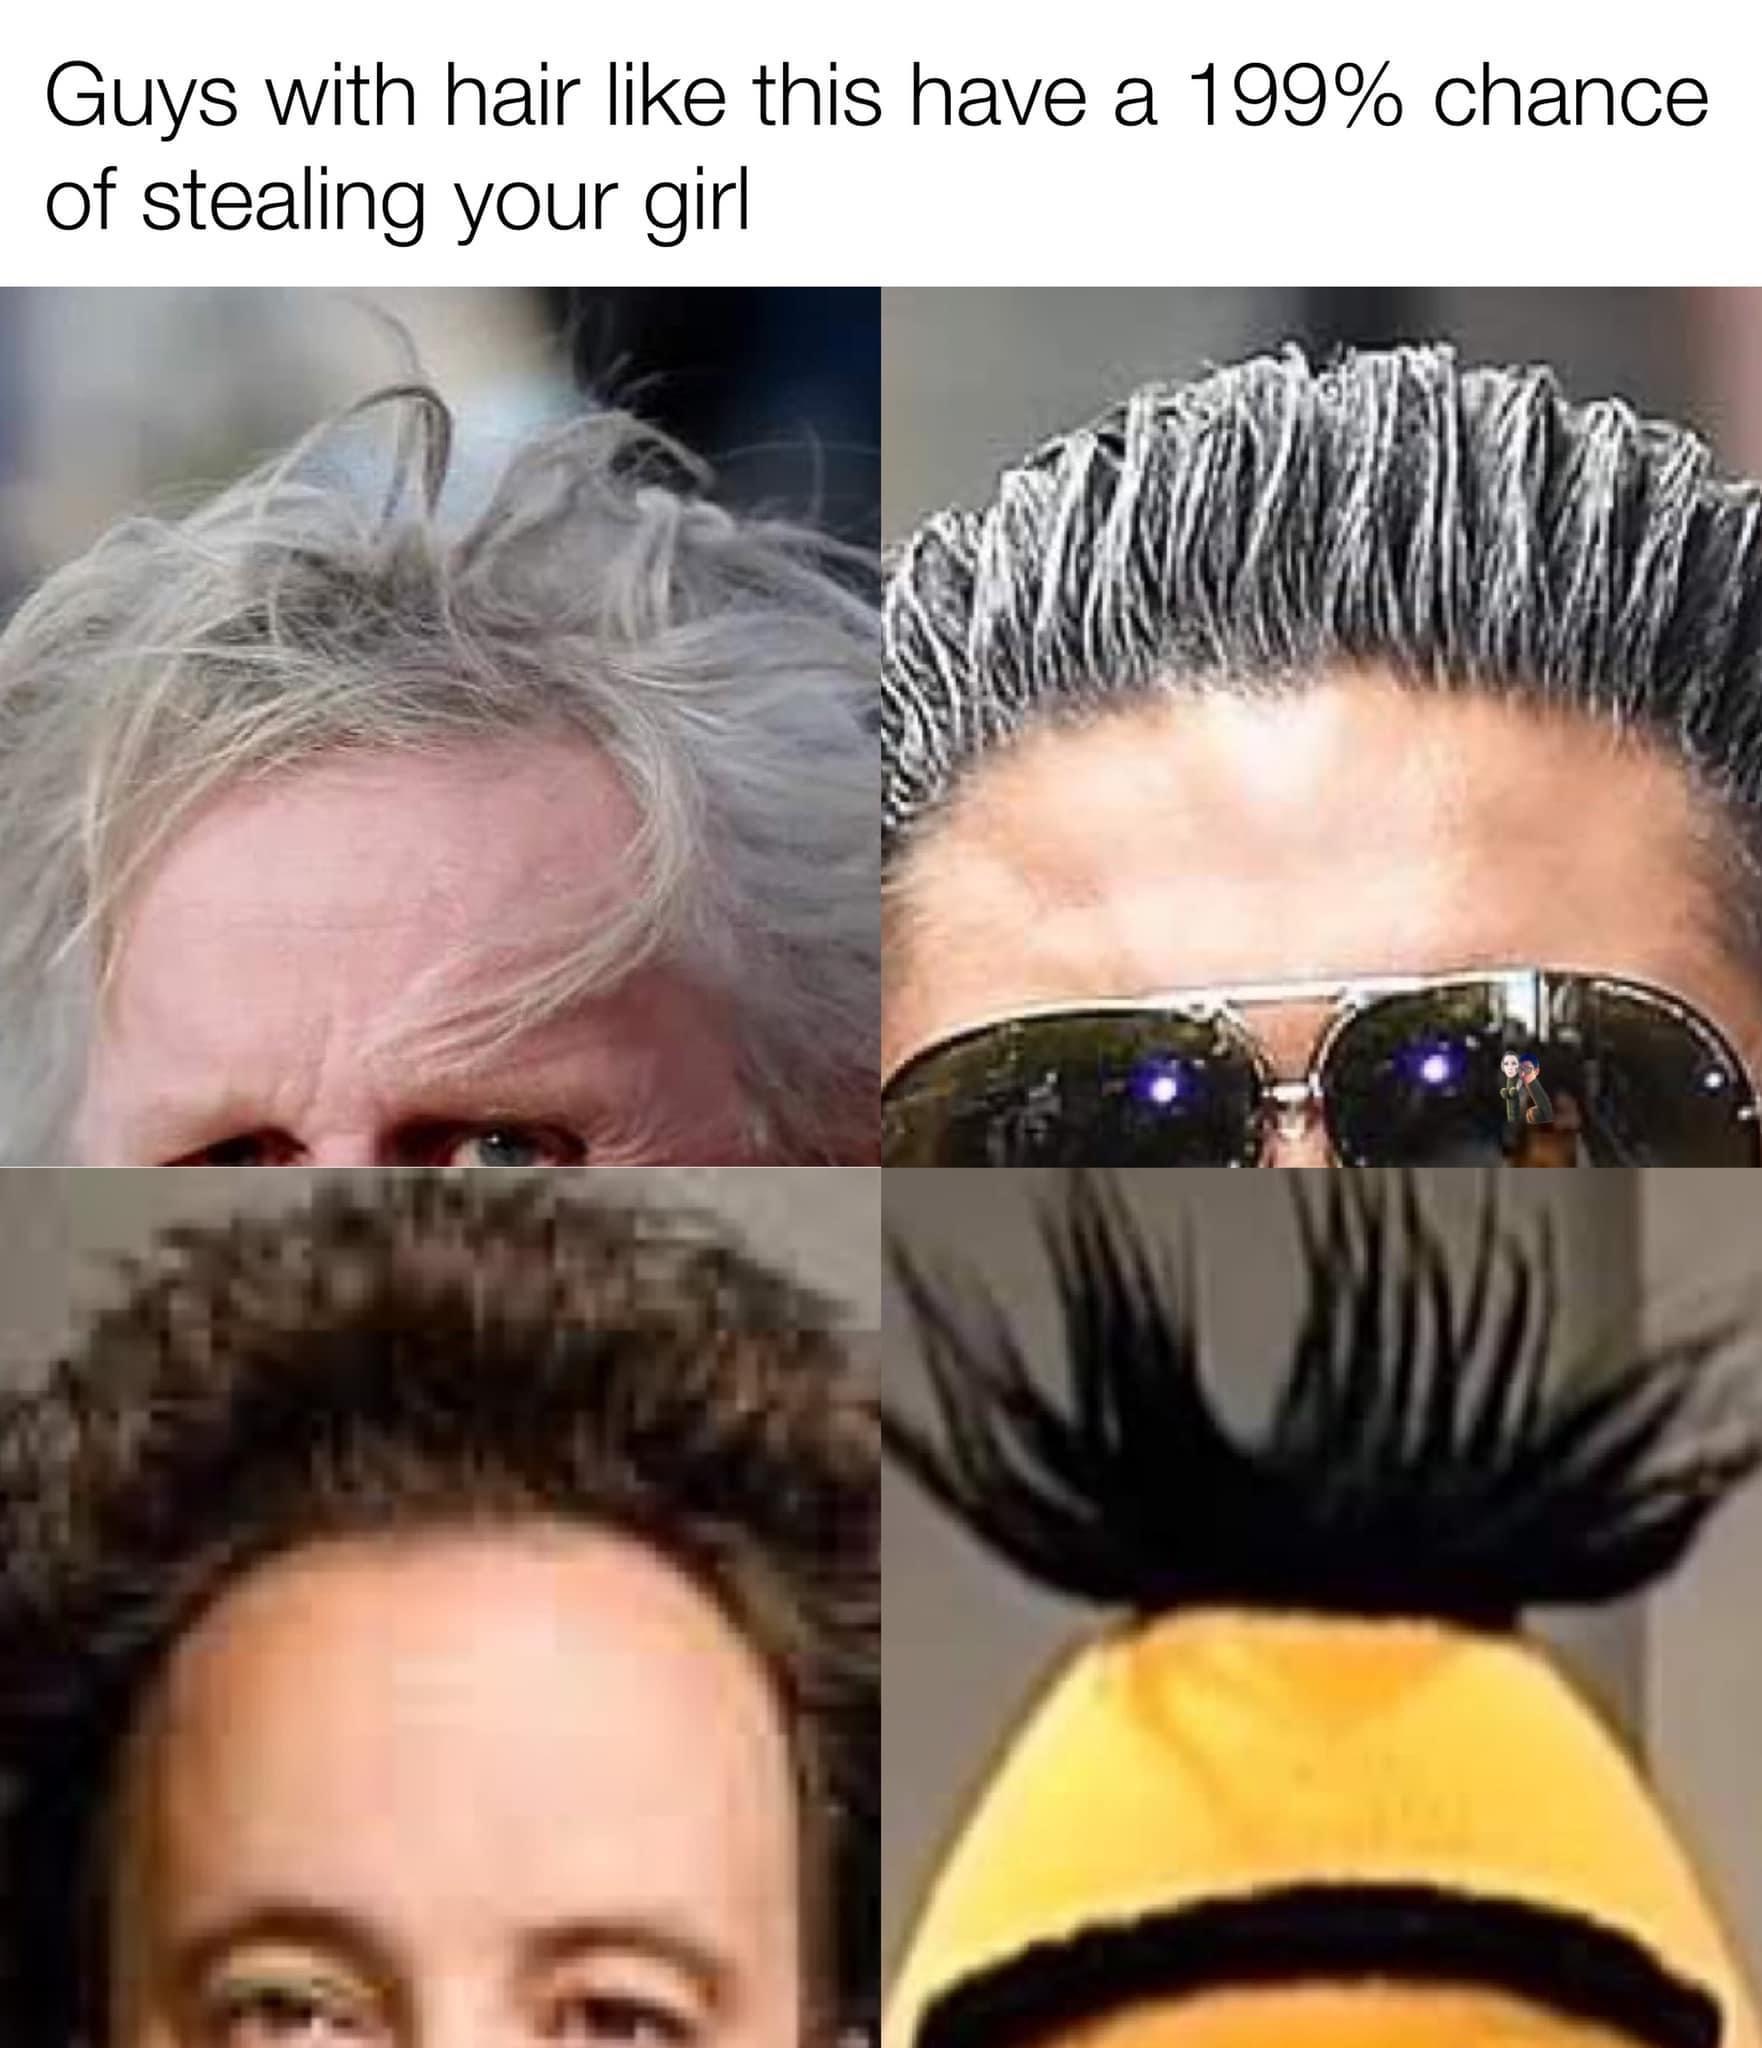 dank memes - funny memes - eyelash - Guys with hair this have a 199% chance of stealing your girl